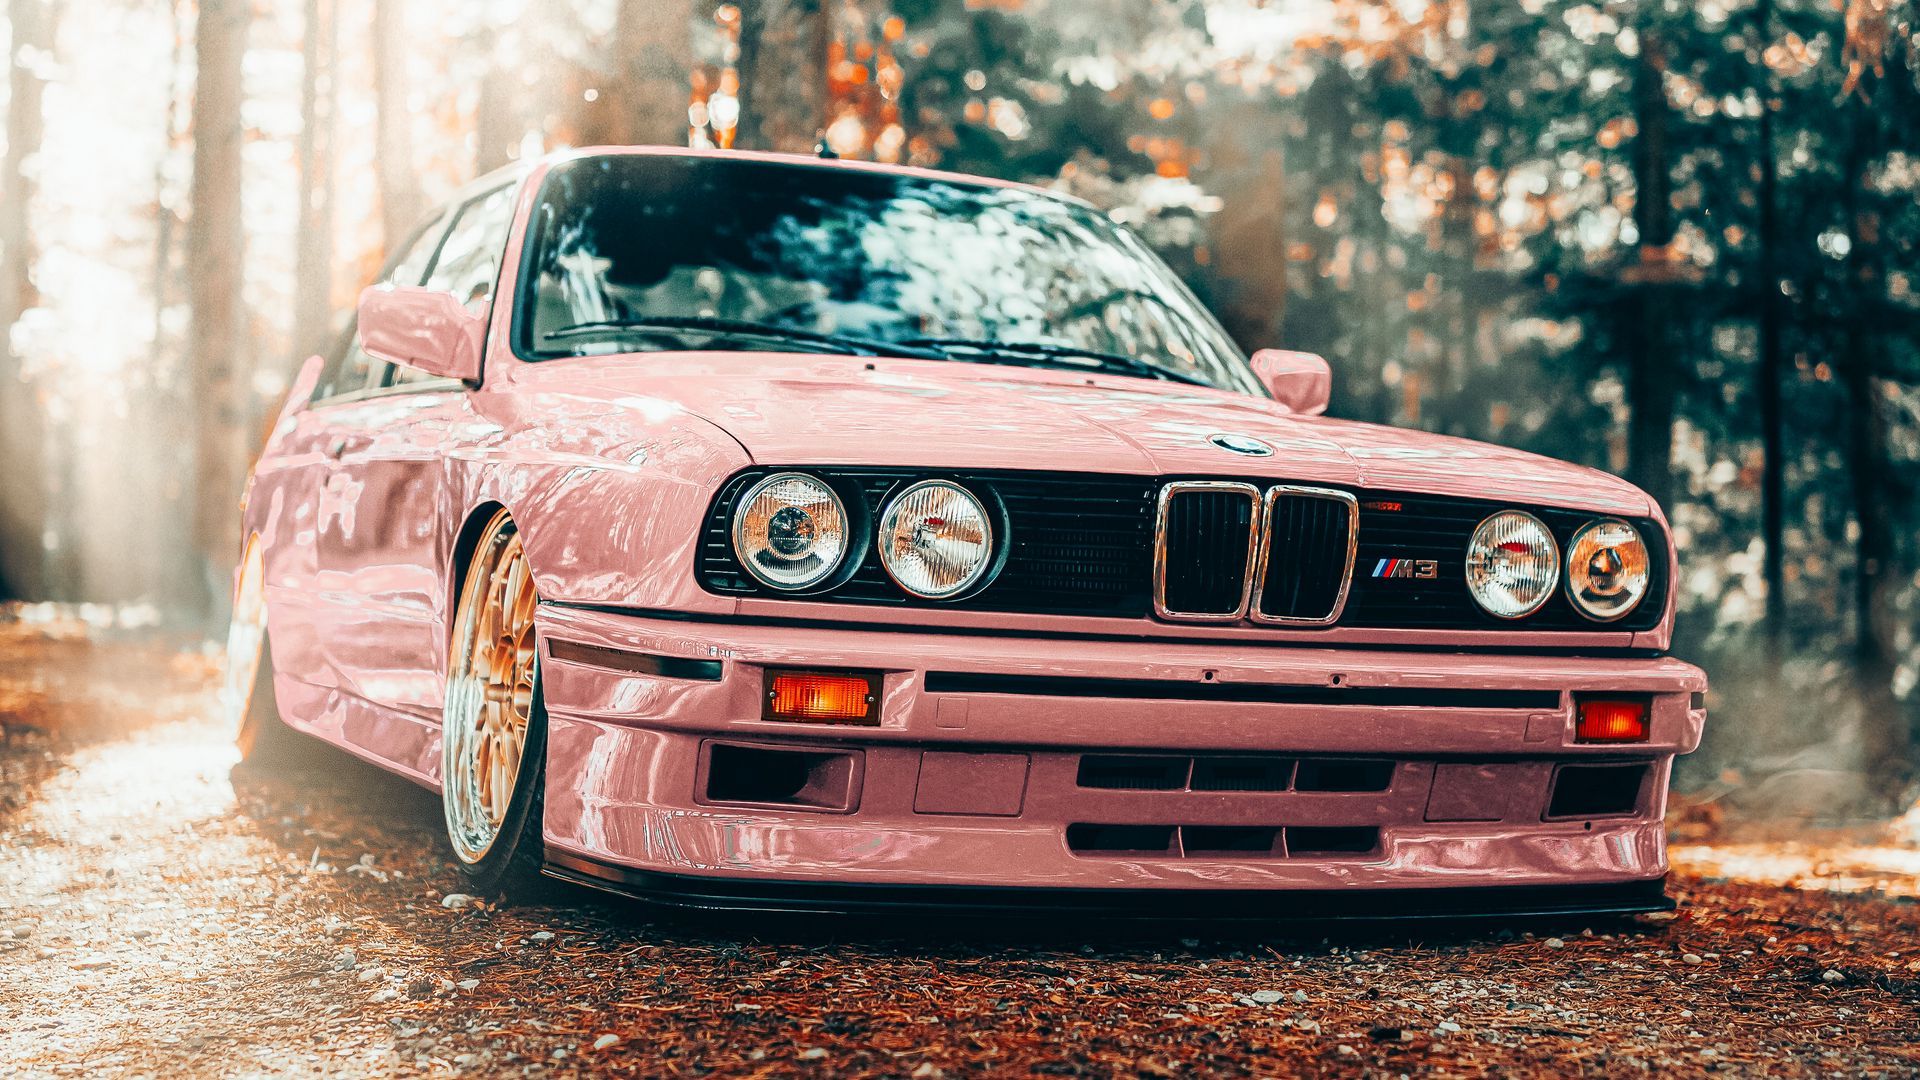 A pink BMW E30 with gold wheels parked in a forest - BMW